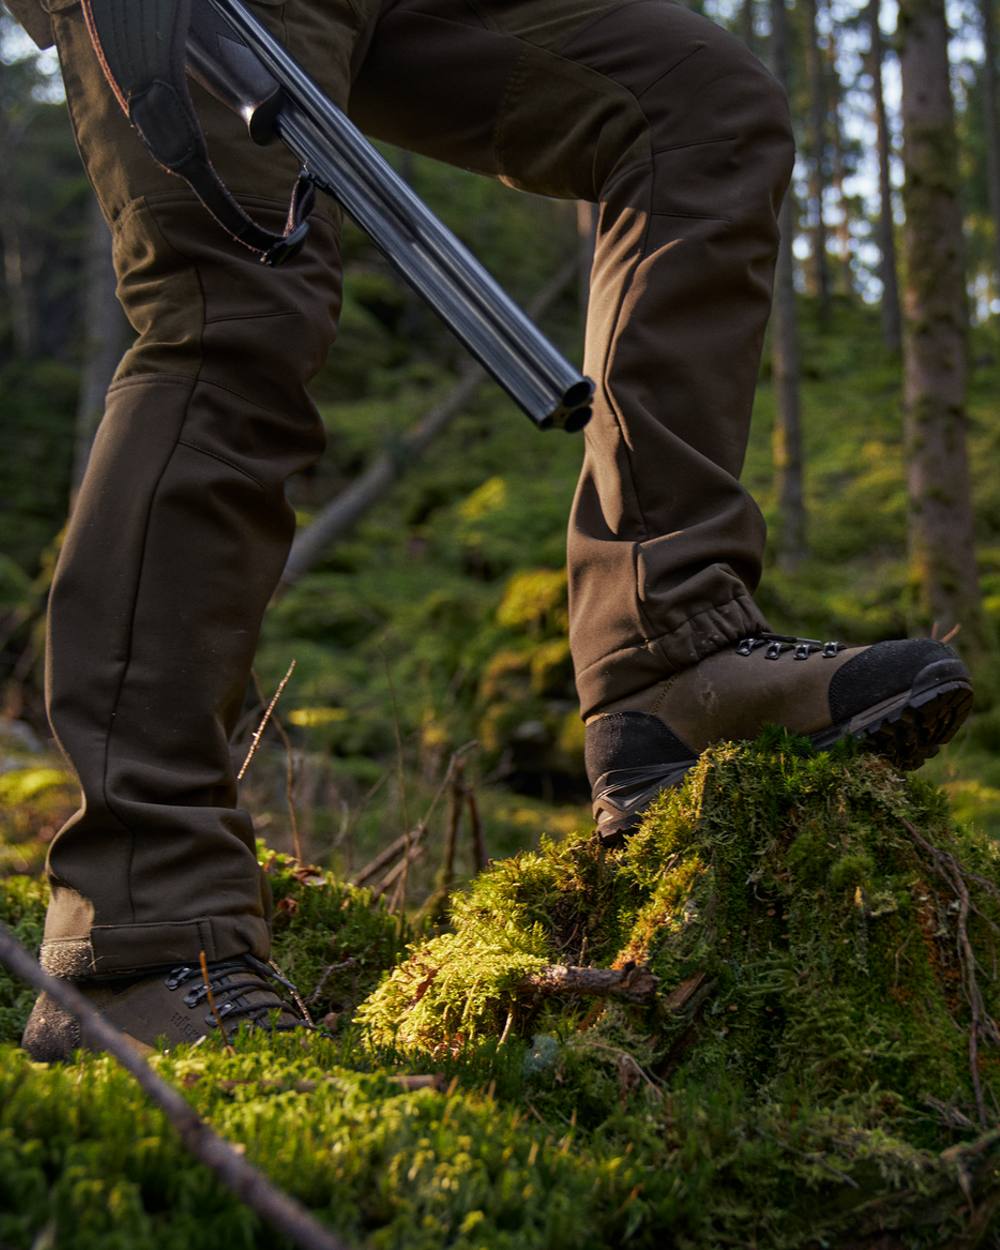 Harkila Forest Hunter Mid GTX Boots in Willow Green 